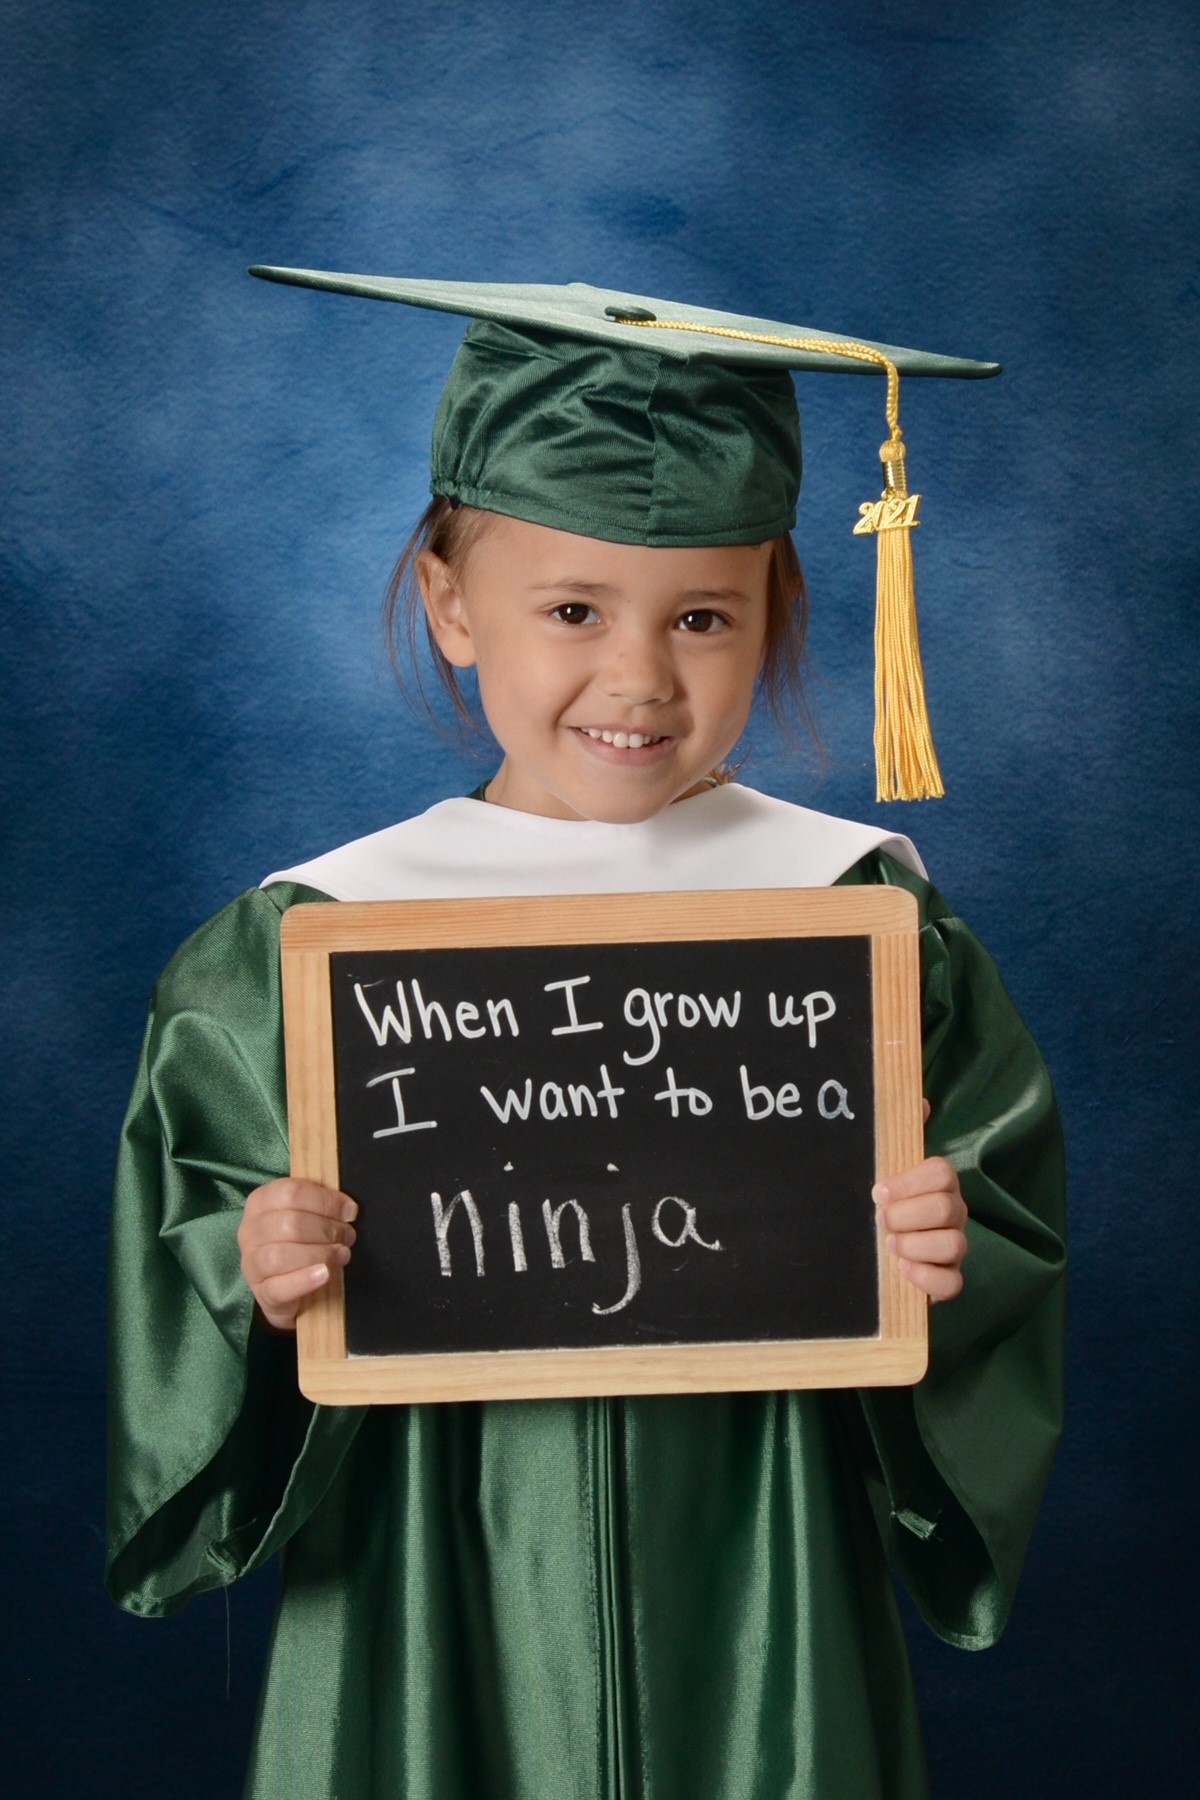 A young girl posing for a graduation photo